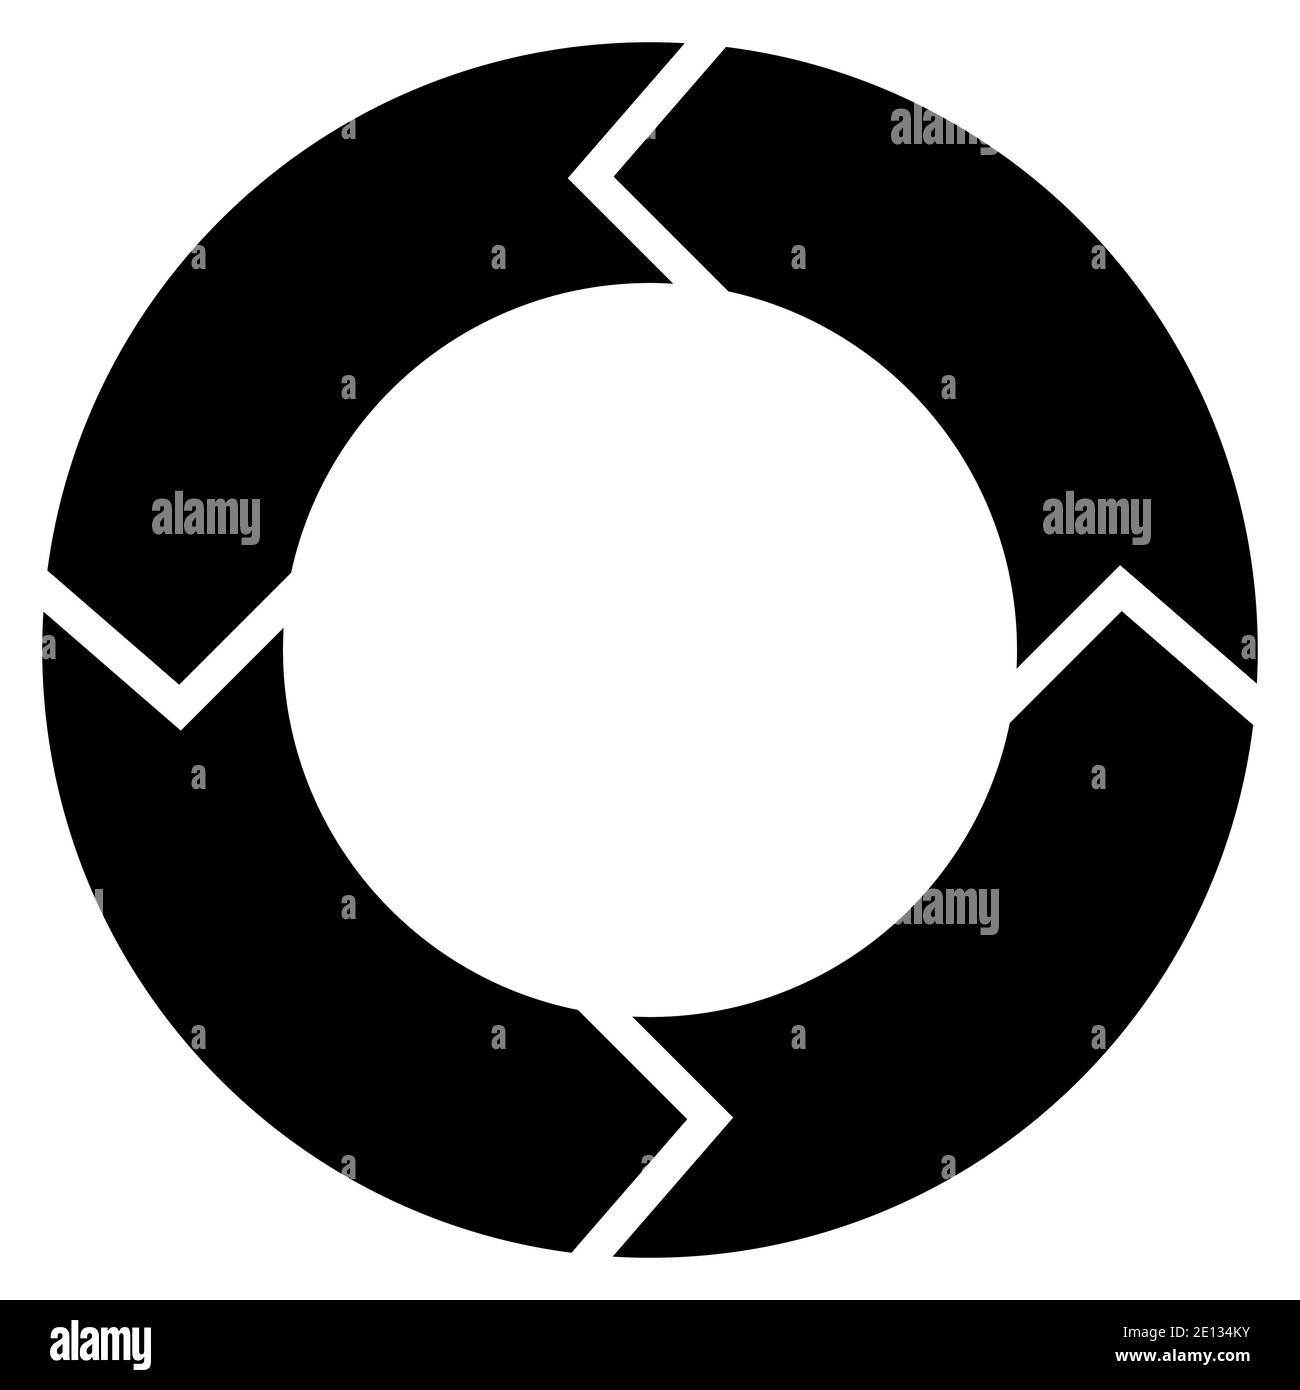 Circular diagram with rotation, four steps. Black on white background. Stock Vector